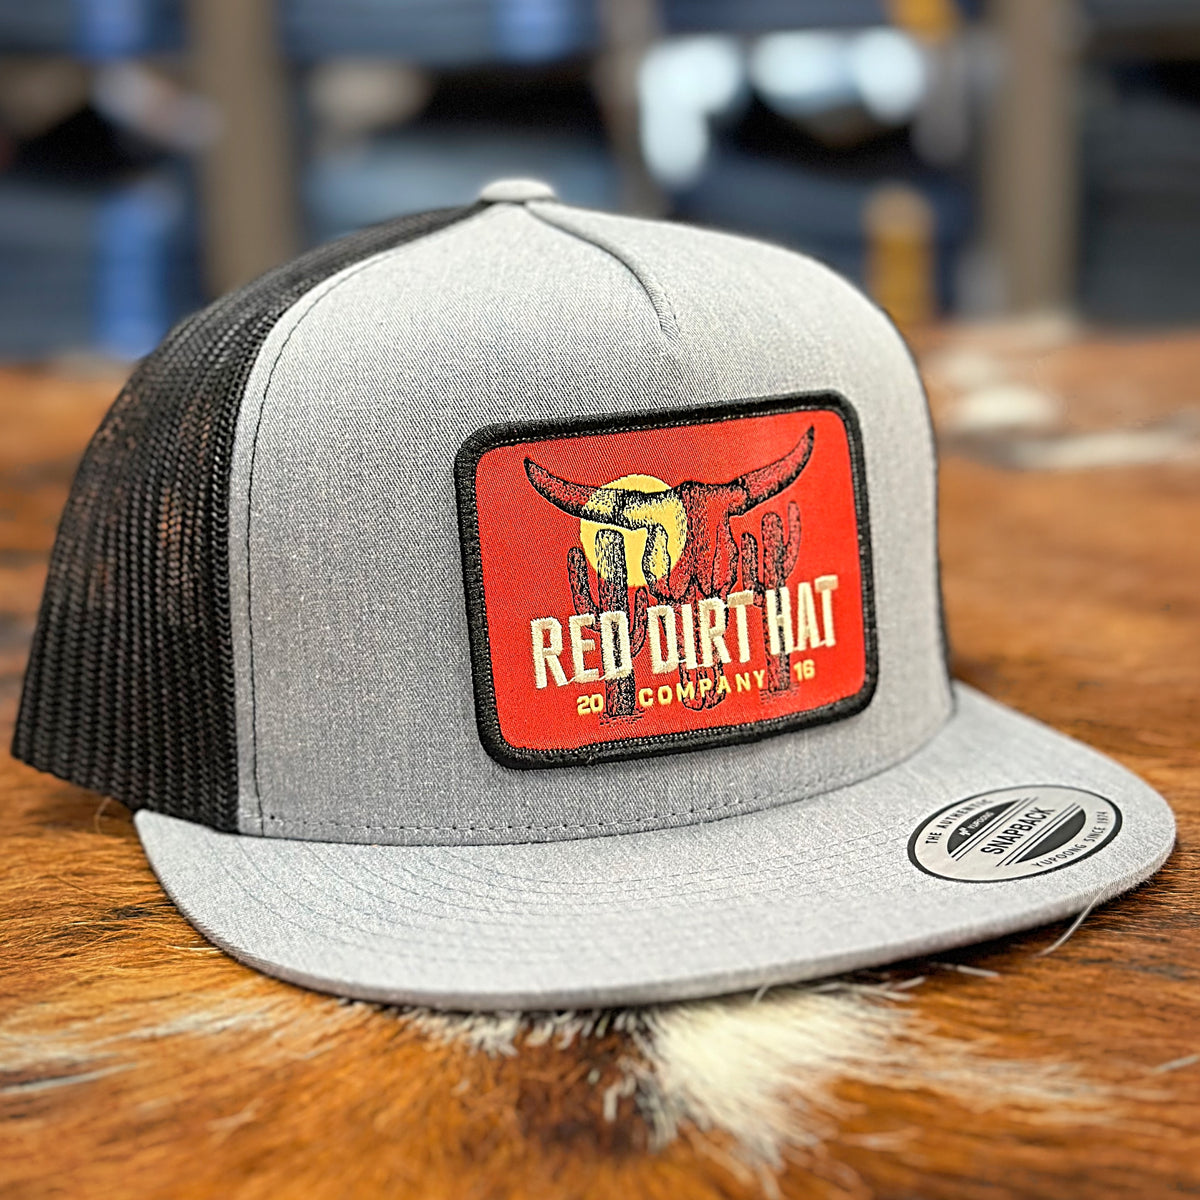 Red Dirt Hat Co. "Boone FB" Hat in Grey/Black